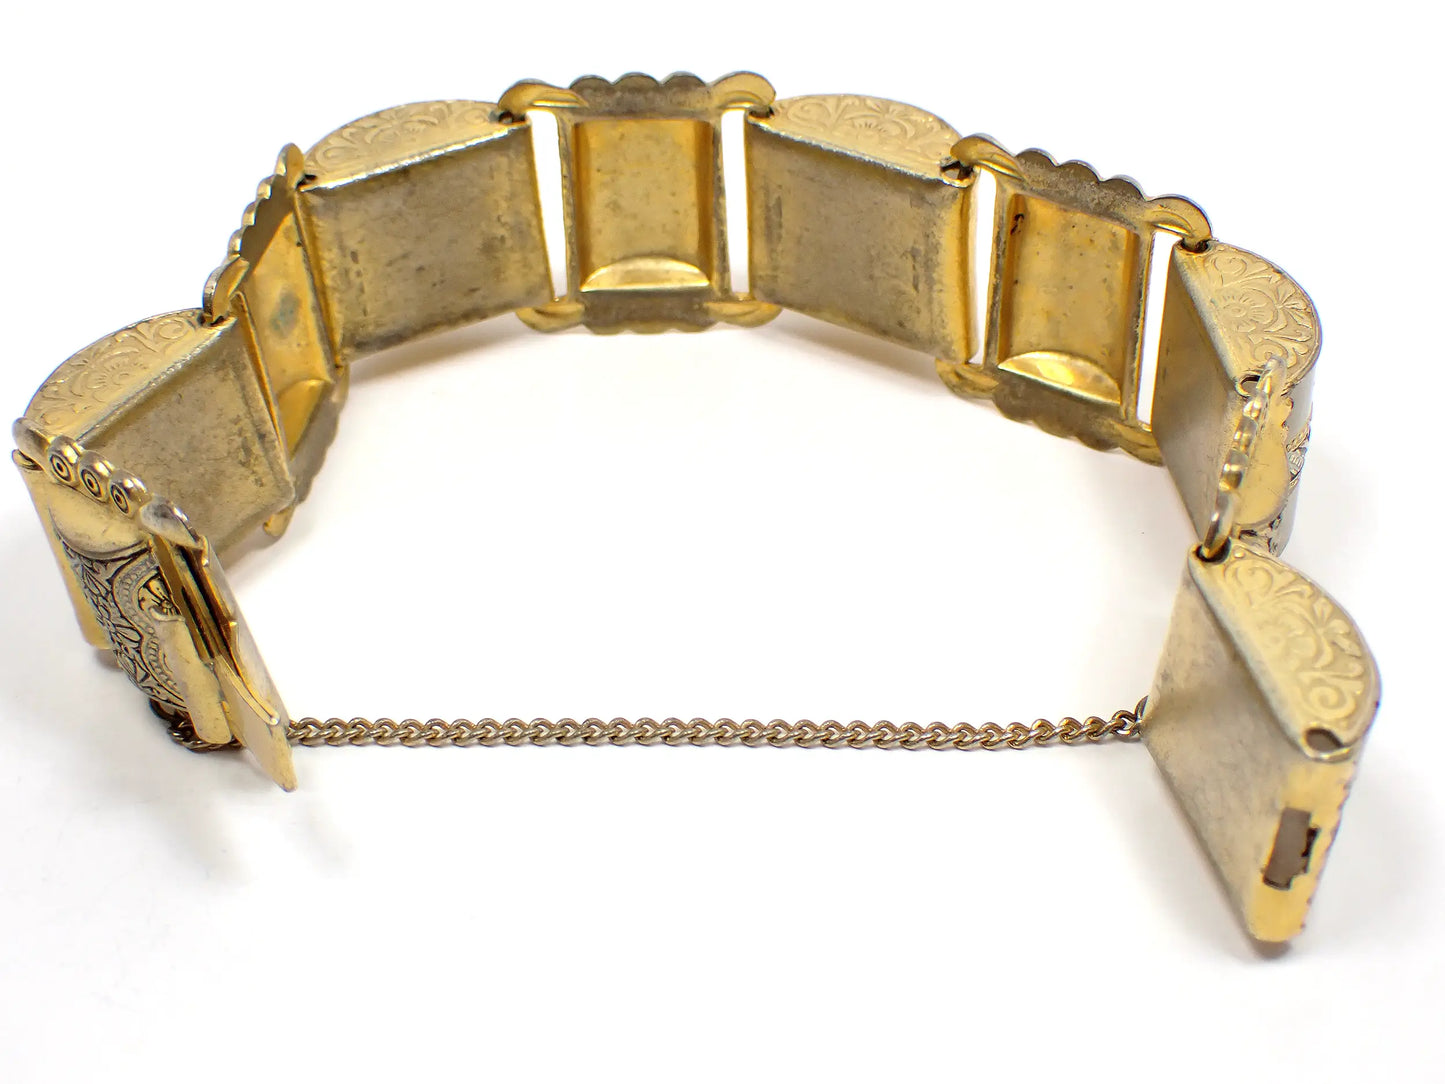 Damascene and Lucite Mid Century Vintage Wide Link Bracelet with Safety Chain